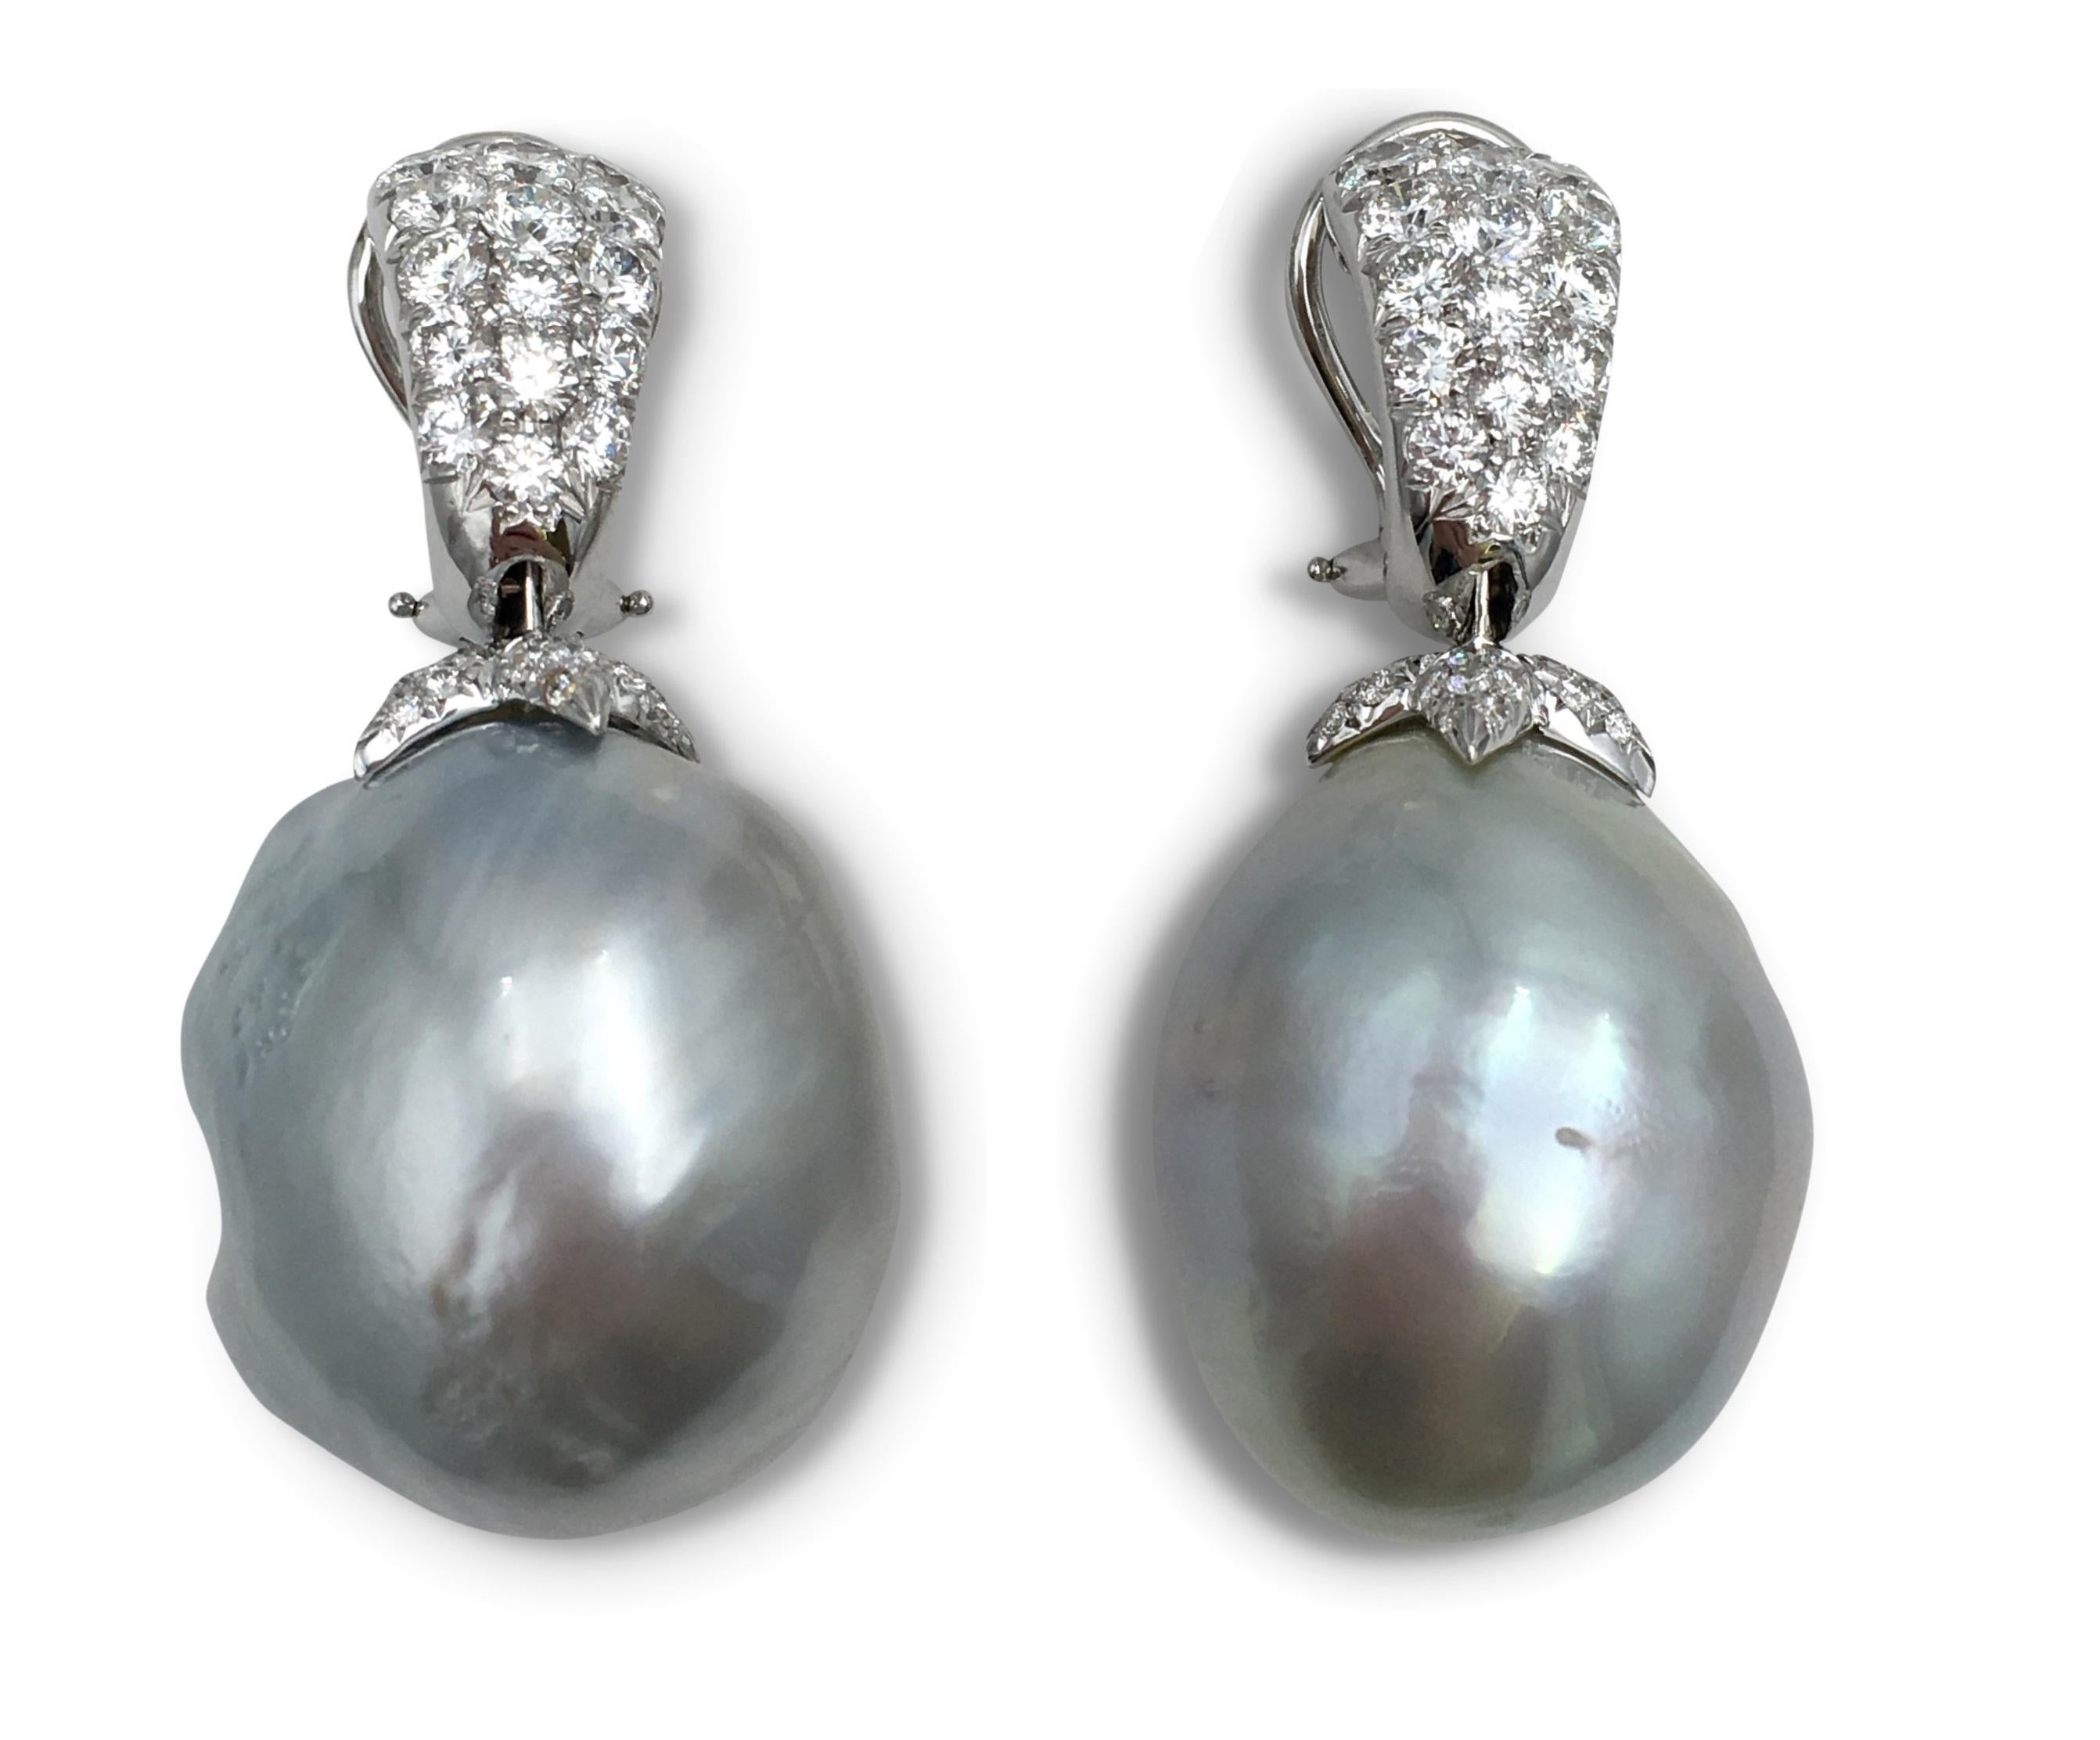 A pair of grey hued baroque pearl drop clip earrings set with approximately 4.45 carats total weight of round brilliant cut diamonds (F color, VS clarity). The pearls measure approximately 24 x 21.3 x 19.1mm. Made in 18 karat white gold. Signed